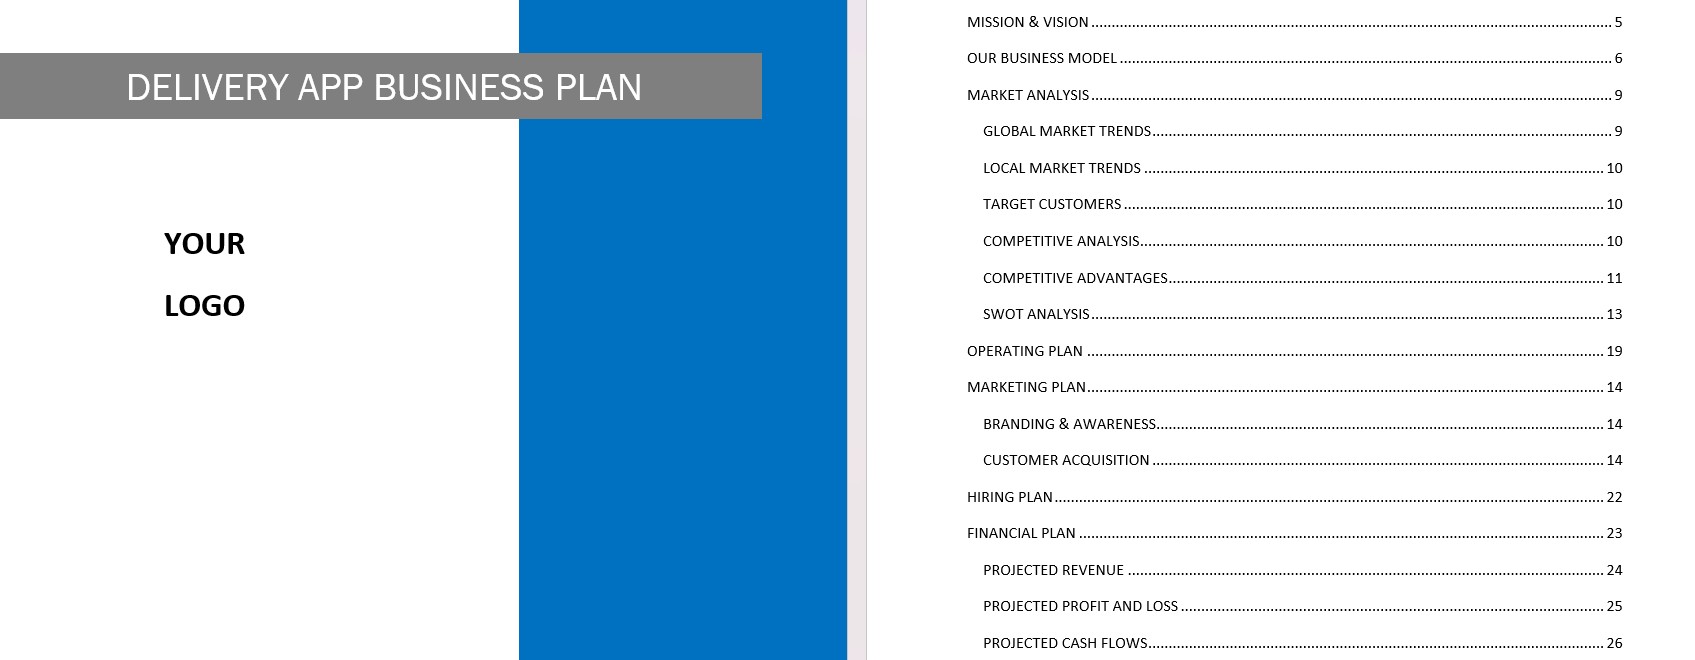 Delivery app business plan template in Word